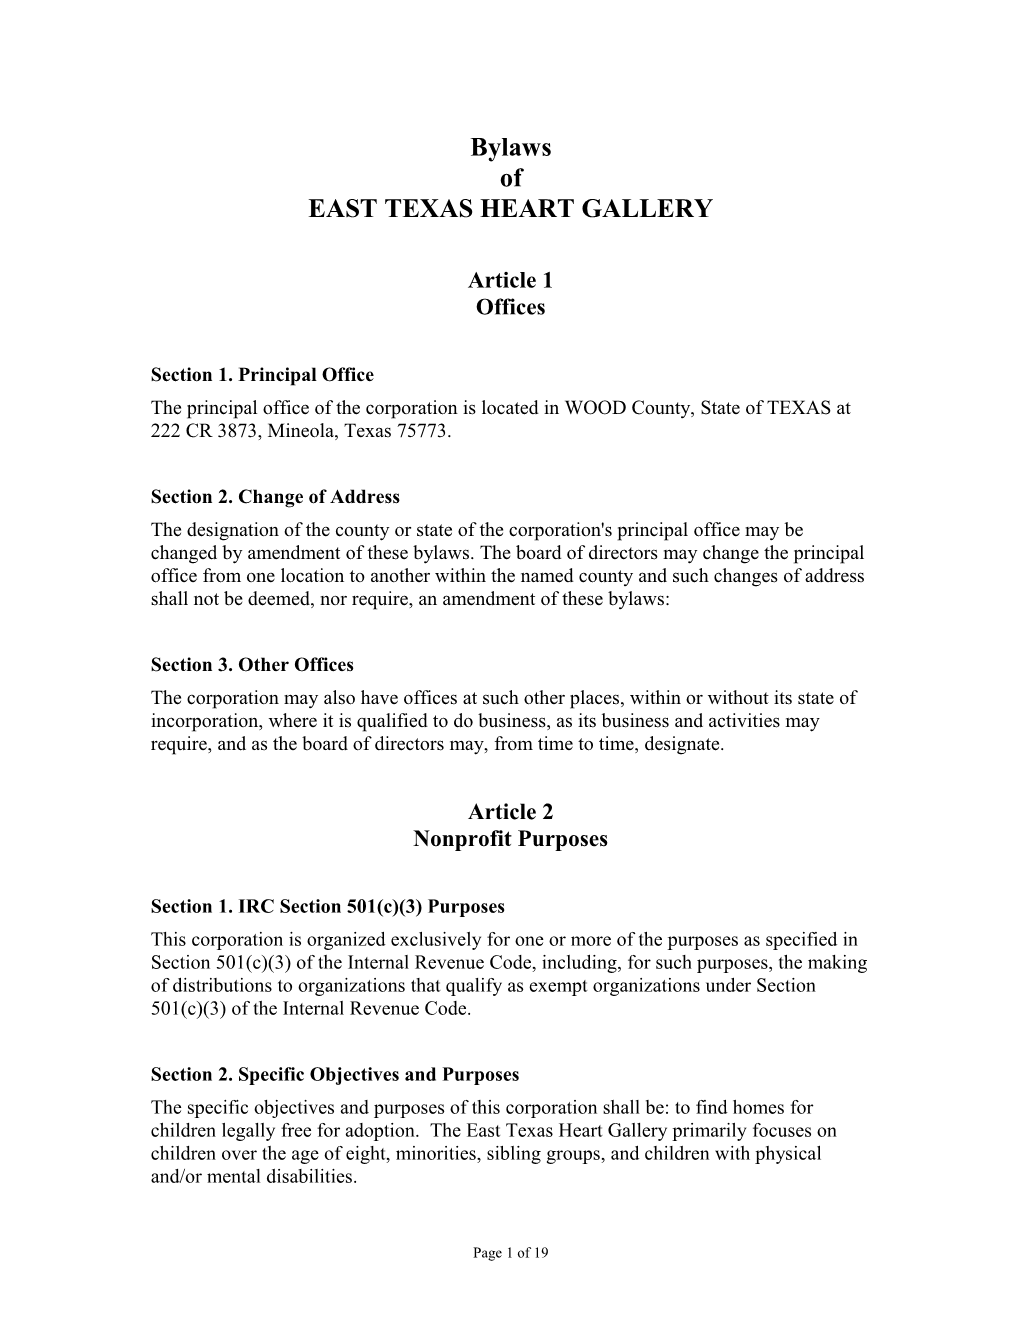 Bylaws of EAST TEXAS HEART GALLERY